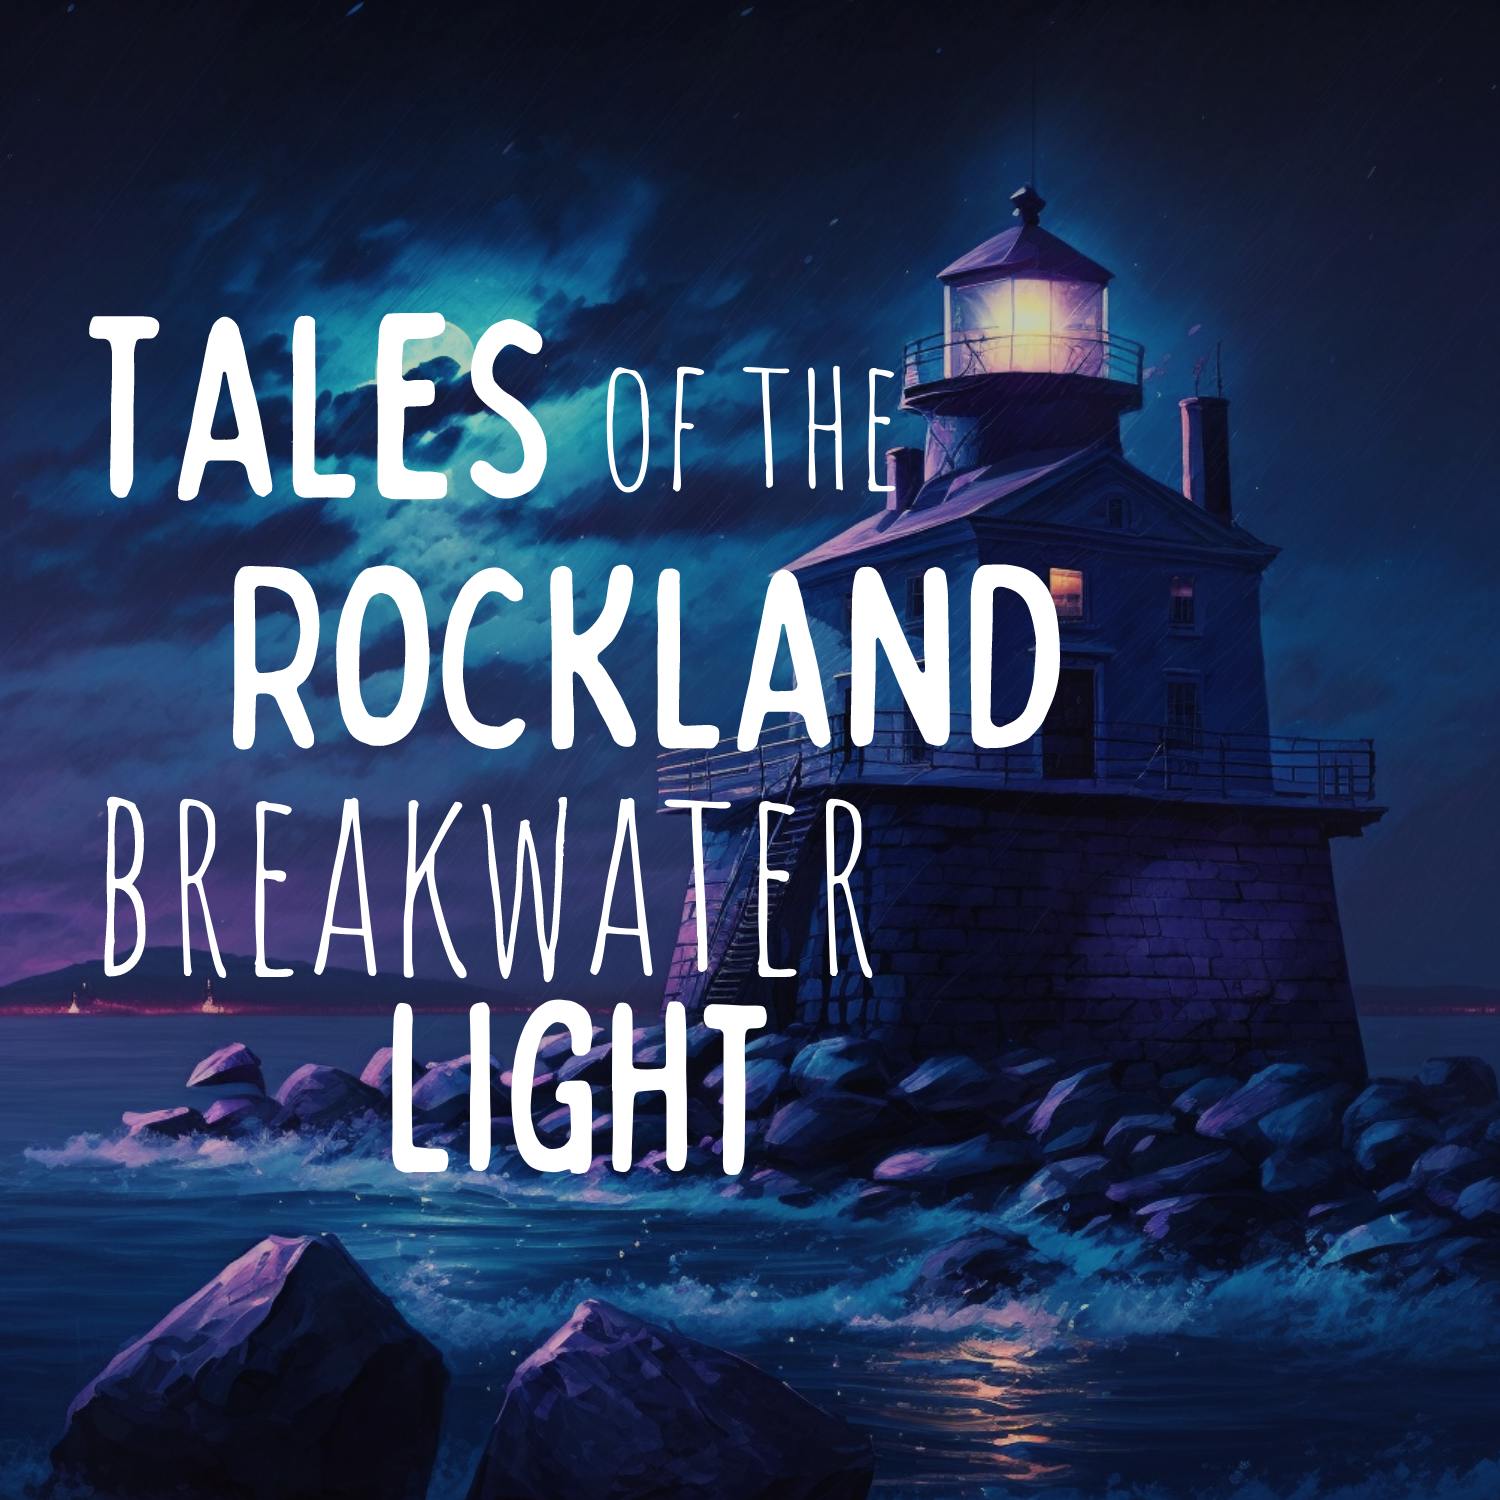 Tales of the Rockland Breakwater Light